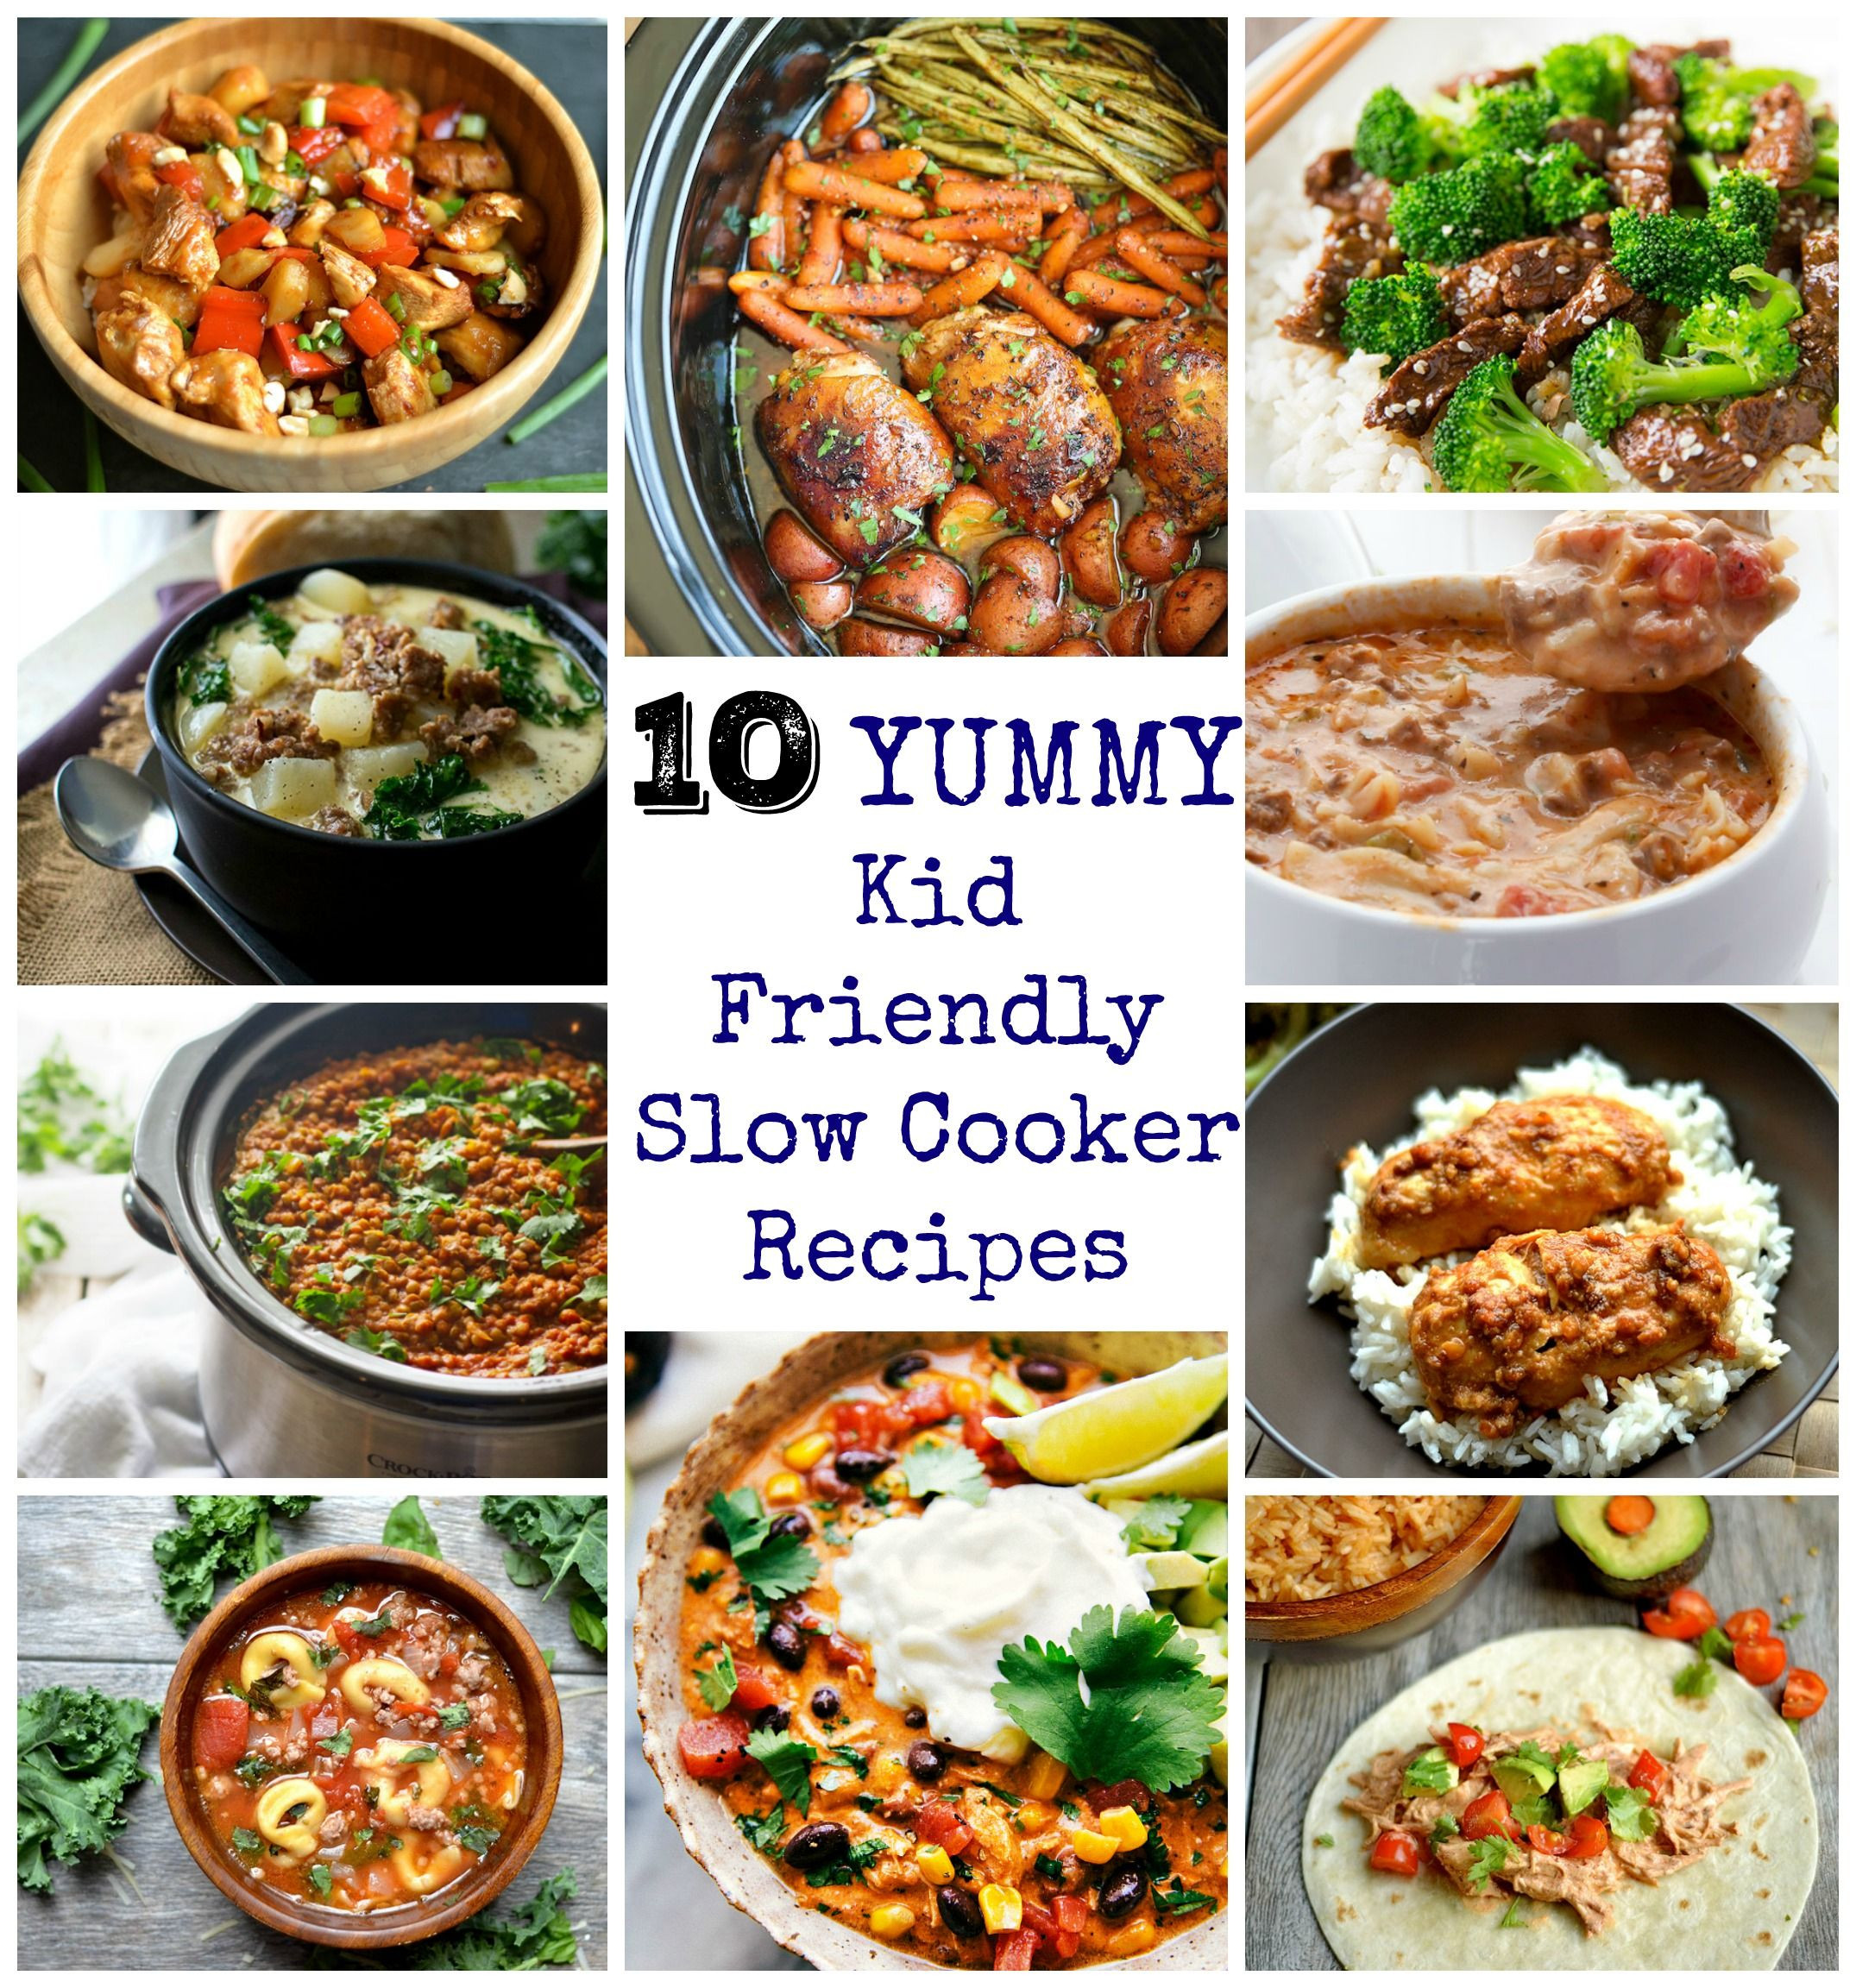 Best Crockpot Recipes For Kids
 10 Yummy and Kid Friendly Slow Cooker Recipes